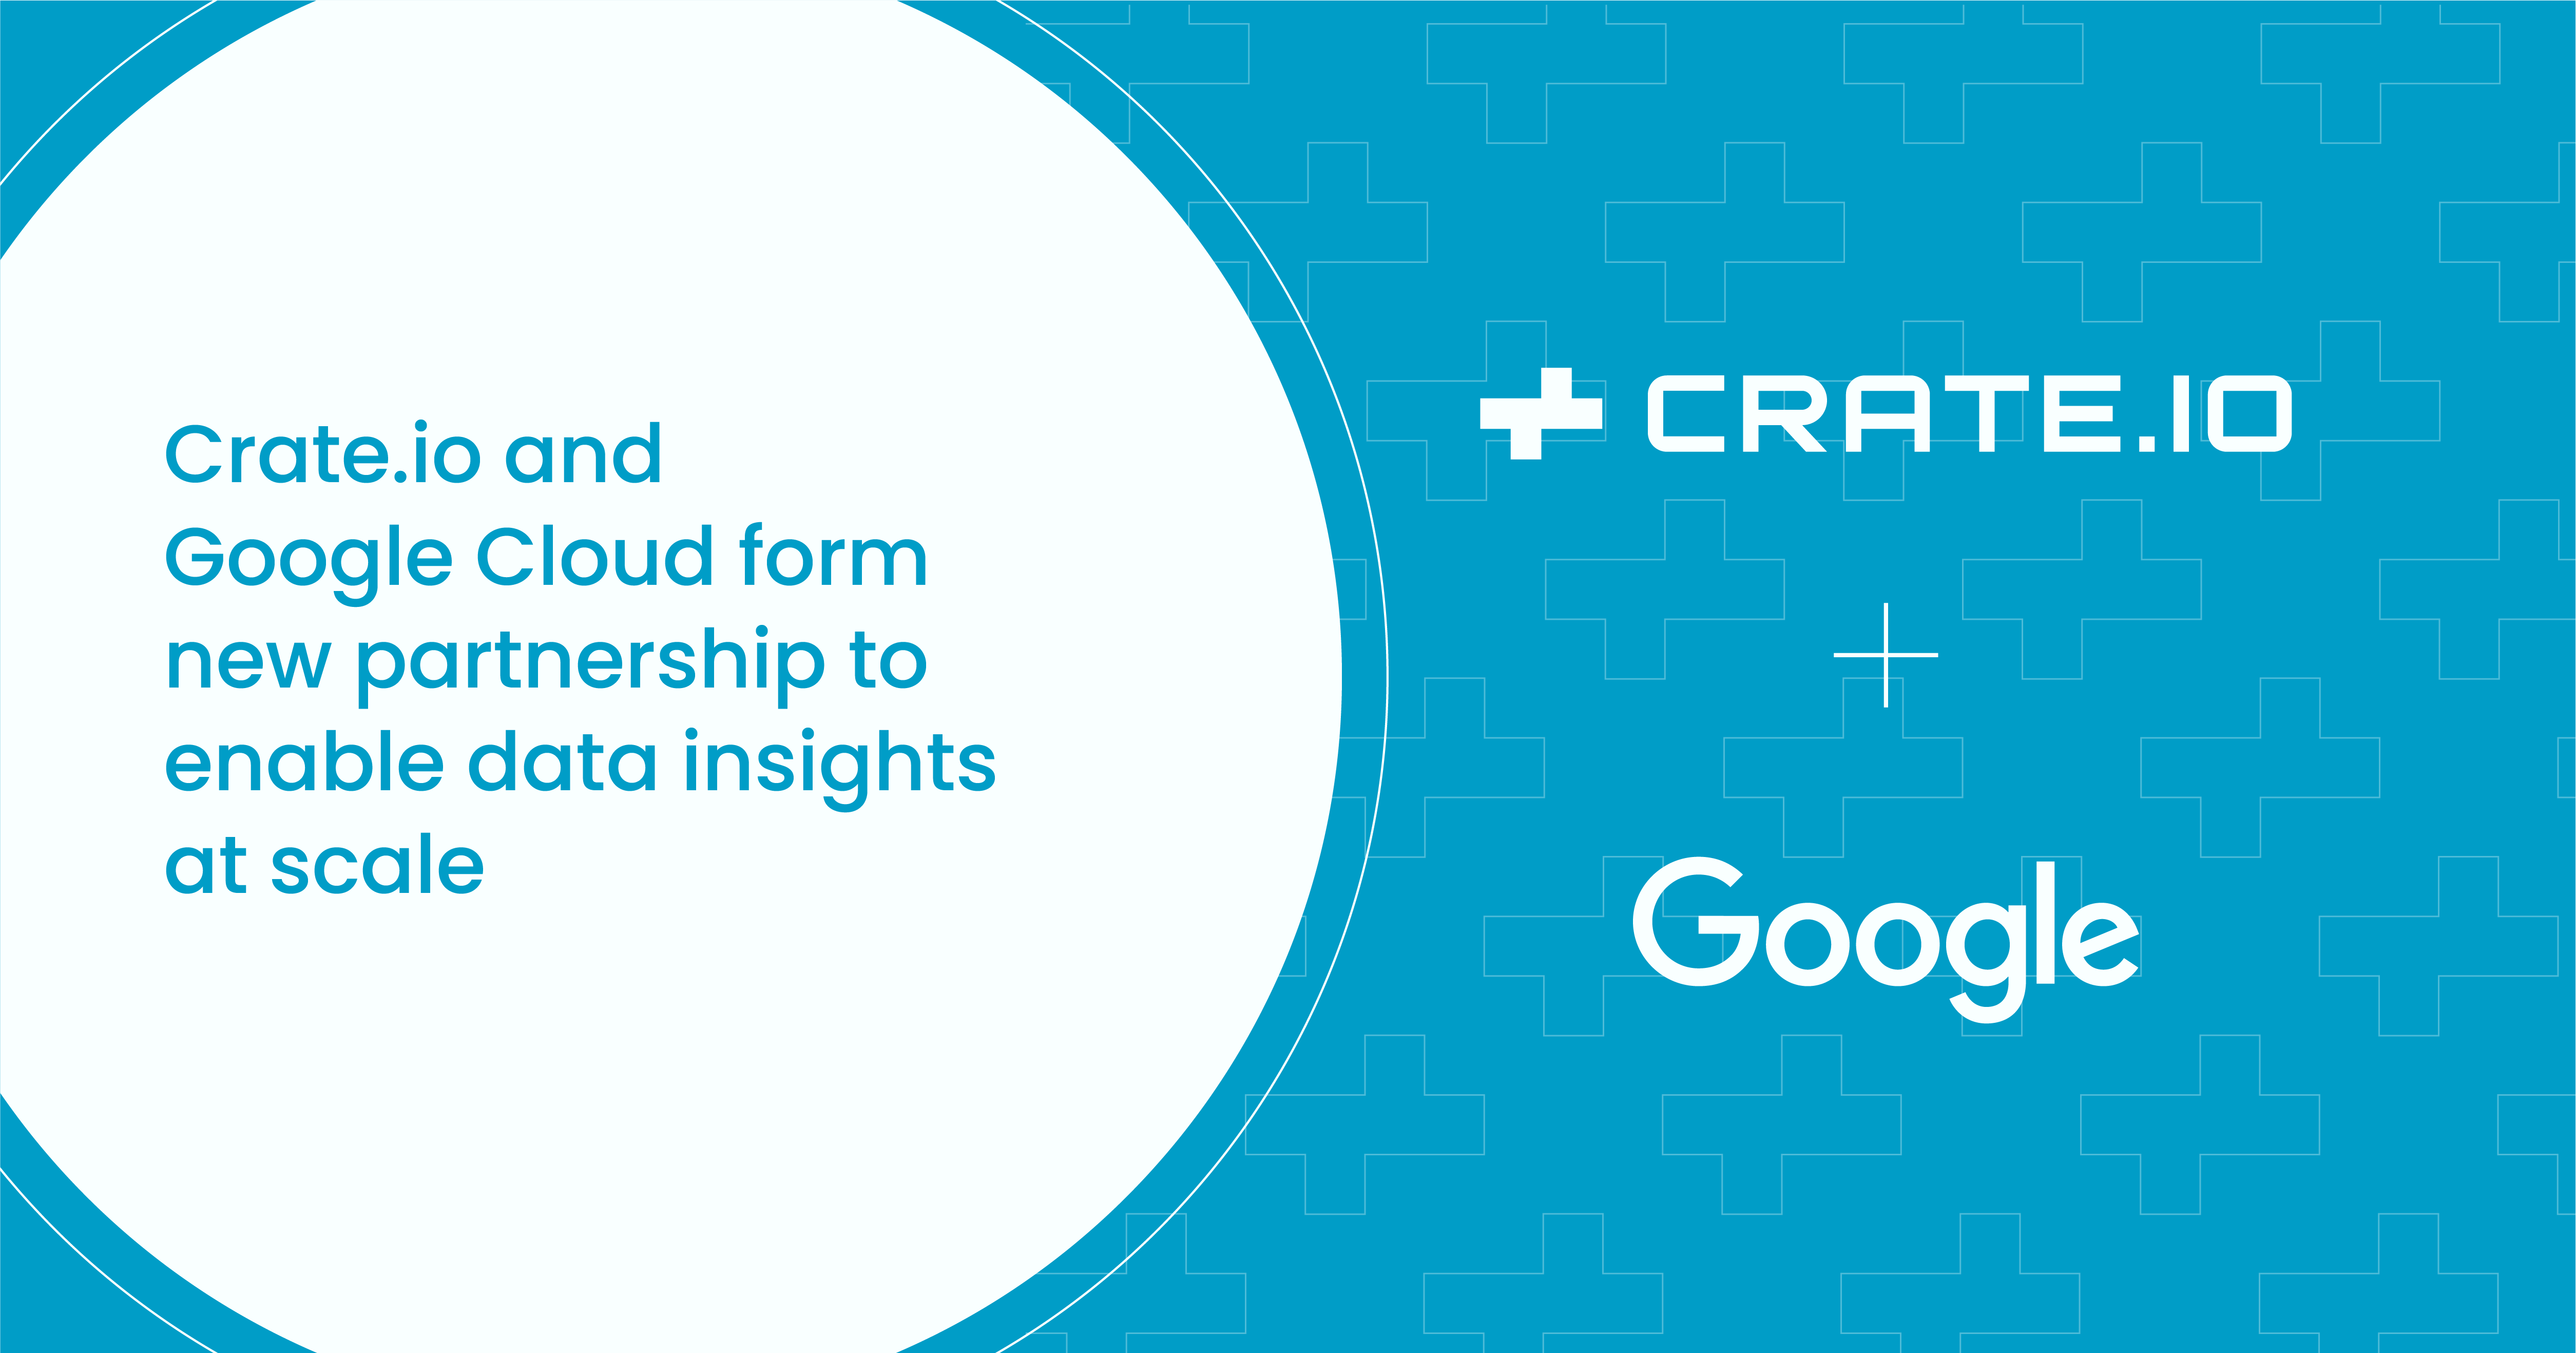 Crate.io and Google Cloud form new partnership to enable data insights at scale